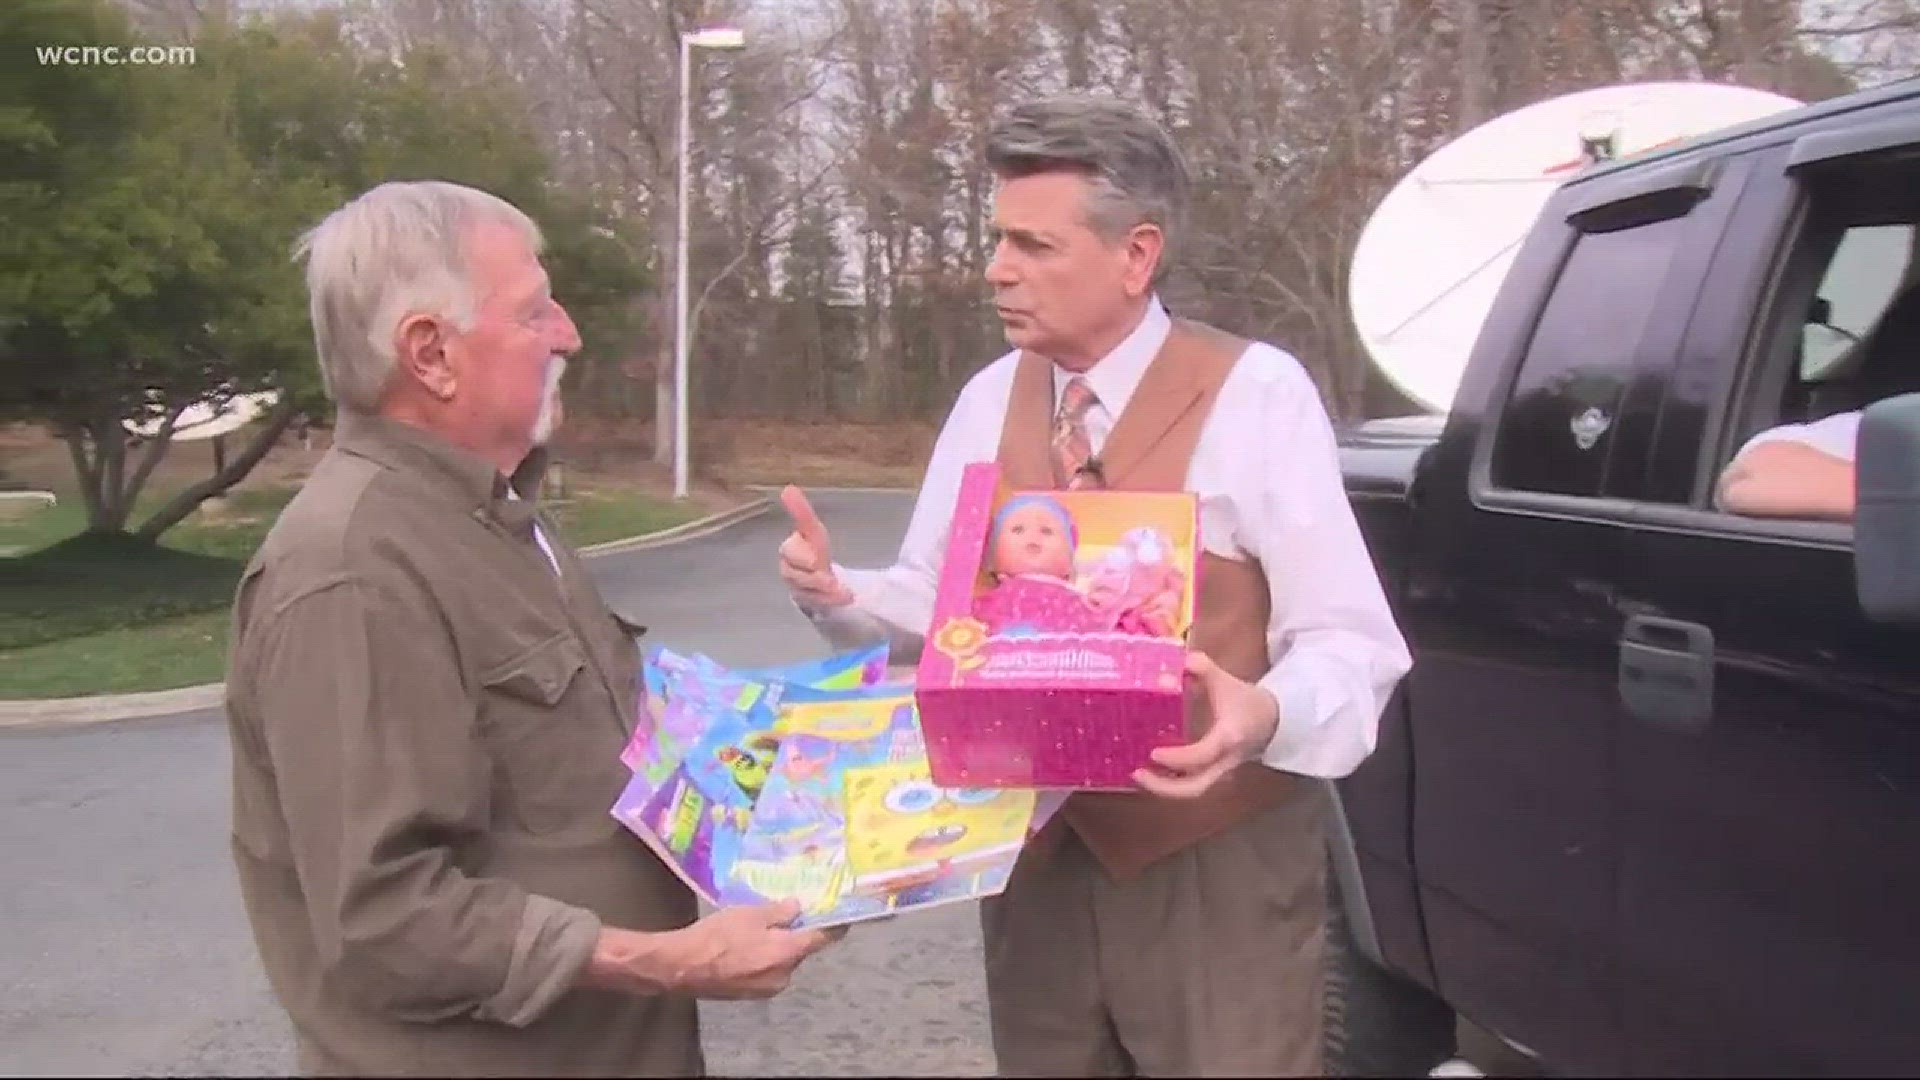 NBC Charlotte is kicking off our annual magical toy drive! Once again, we have partnered with the Salvation Army to make sure the dreams of local children come true.